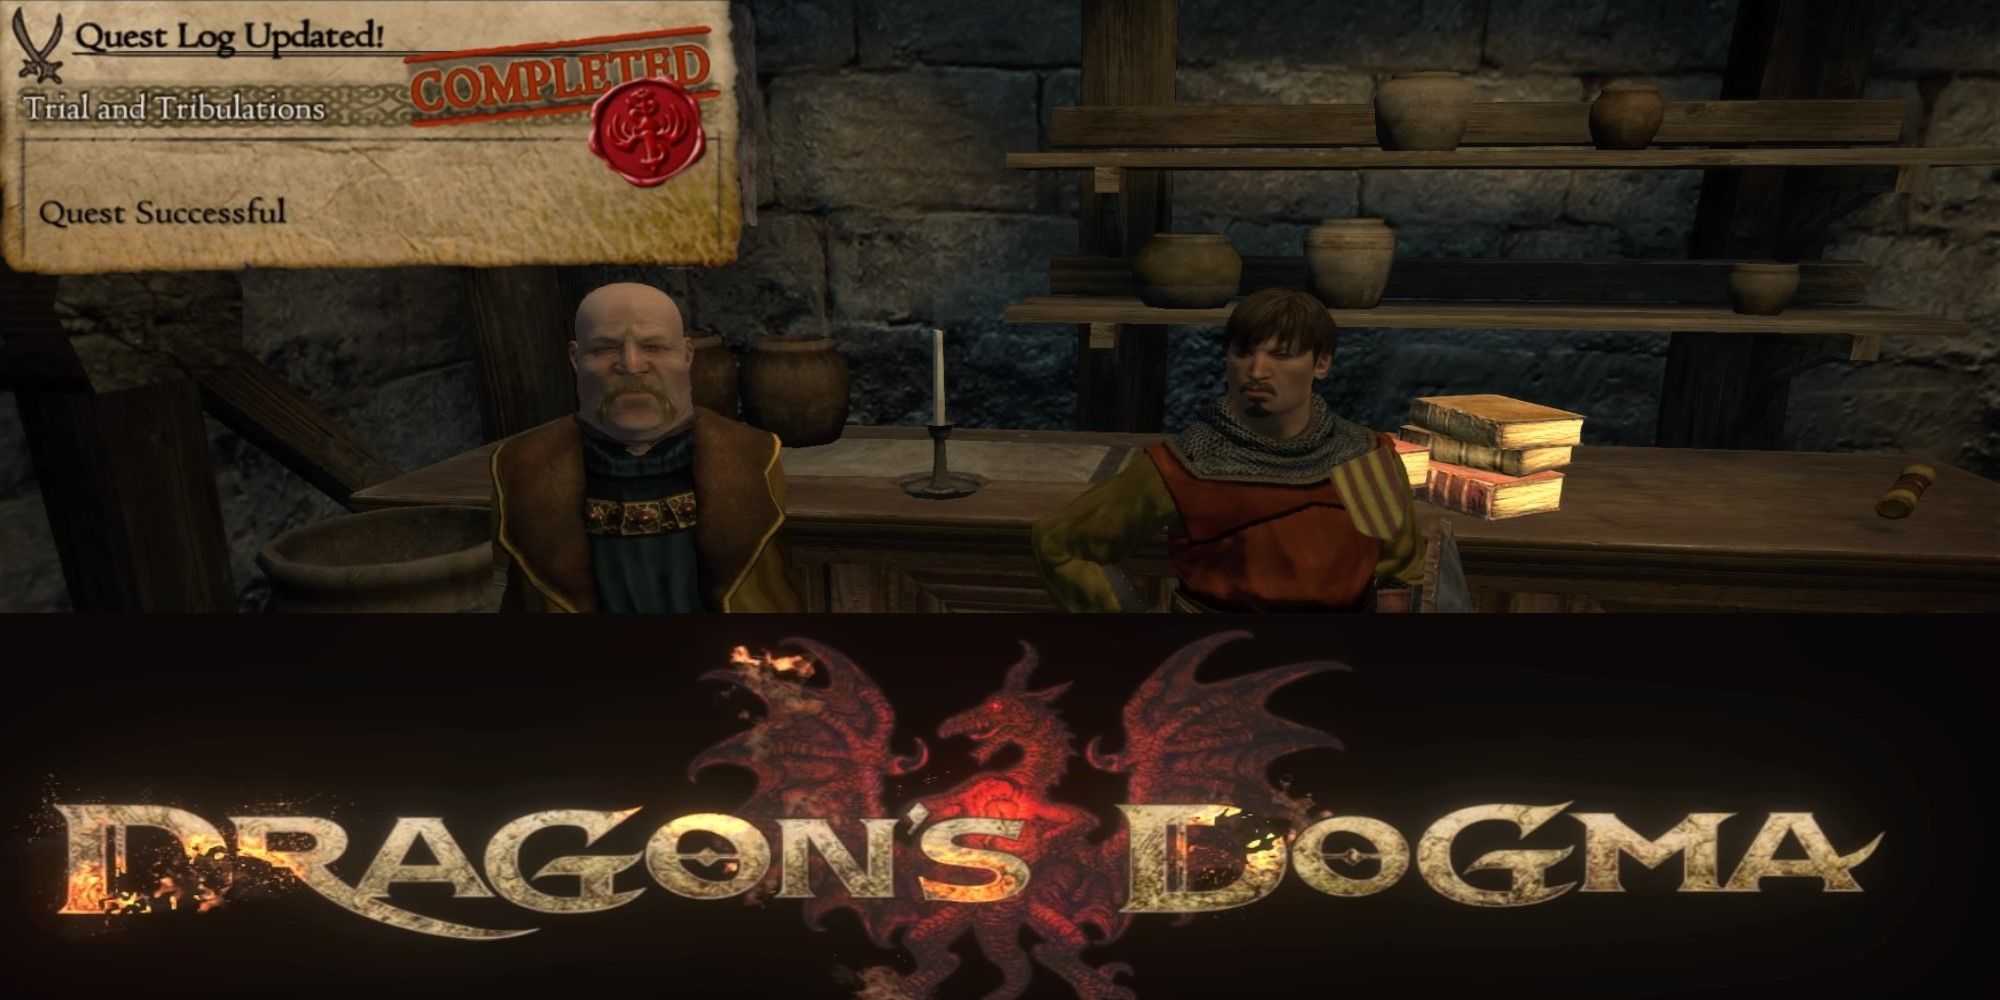 Dragons Dogma split image game logo with Fournival and quest log complete for Trial and Tribulations